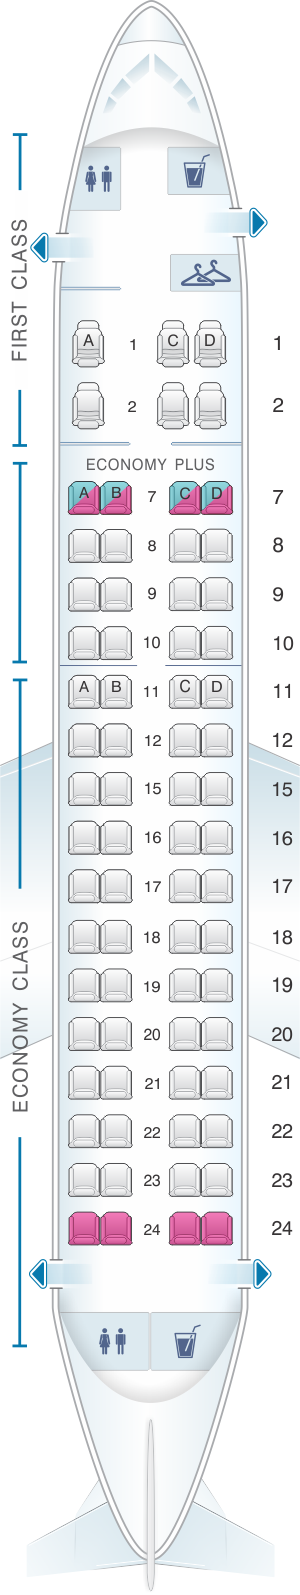 United Airline Seat Map United Airlines And Travelling